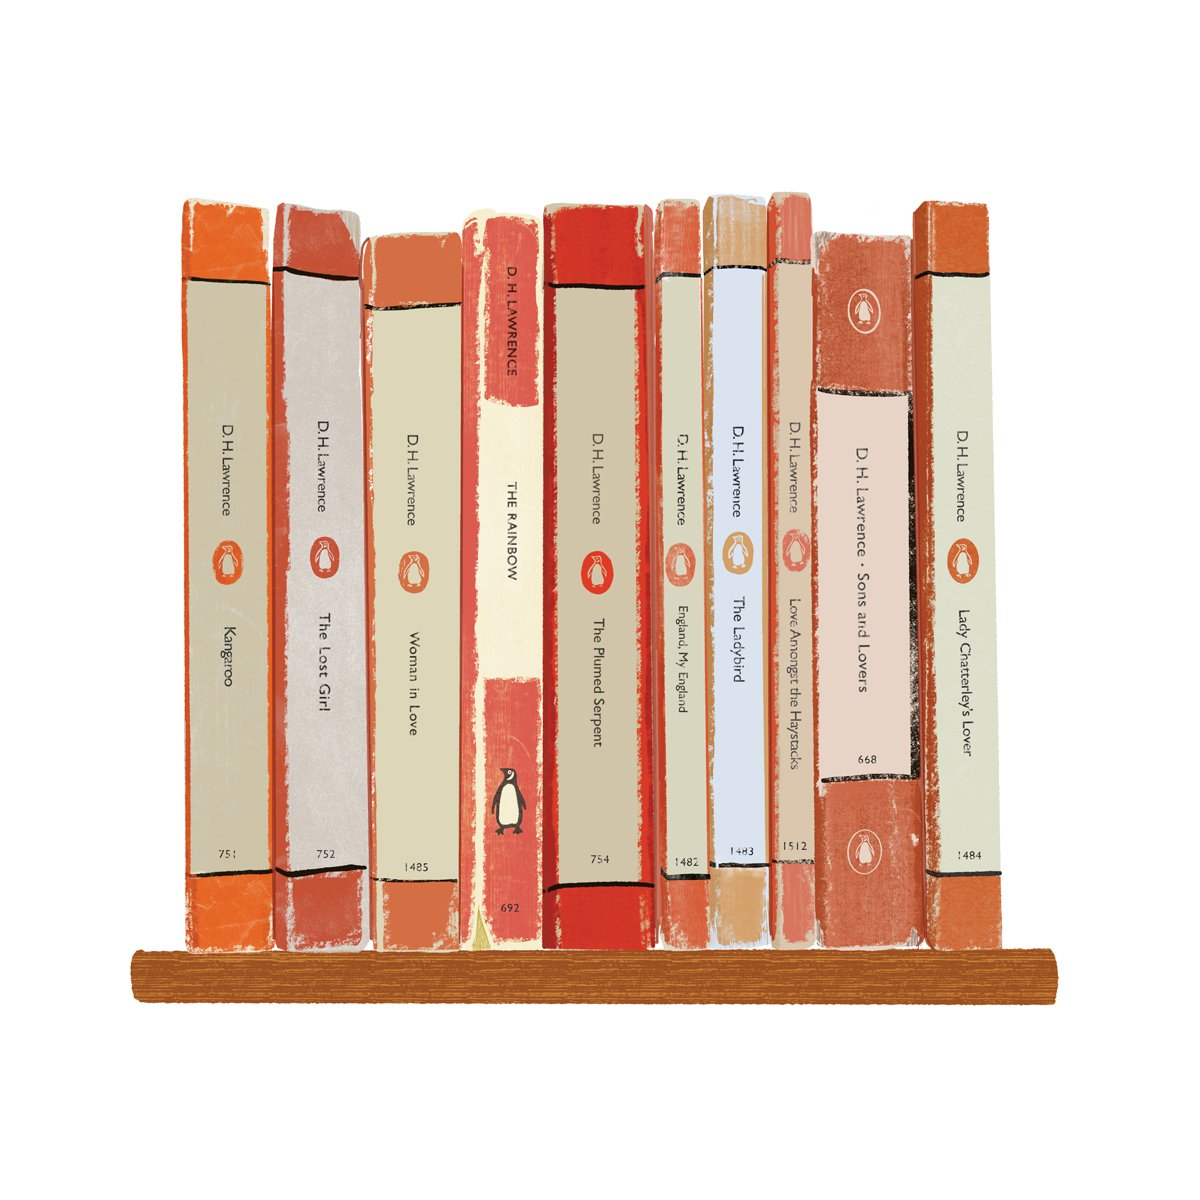 D.H Lawrence book collection, limited-edition by Design Smith